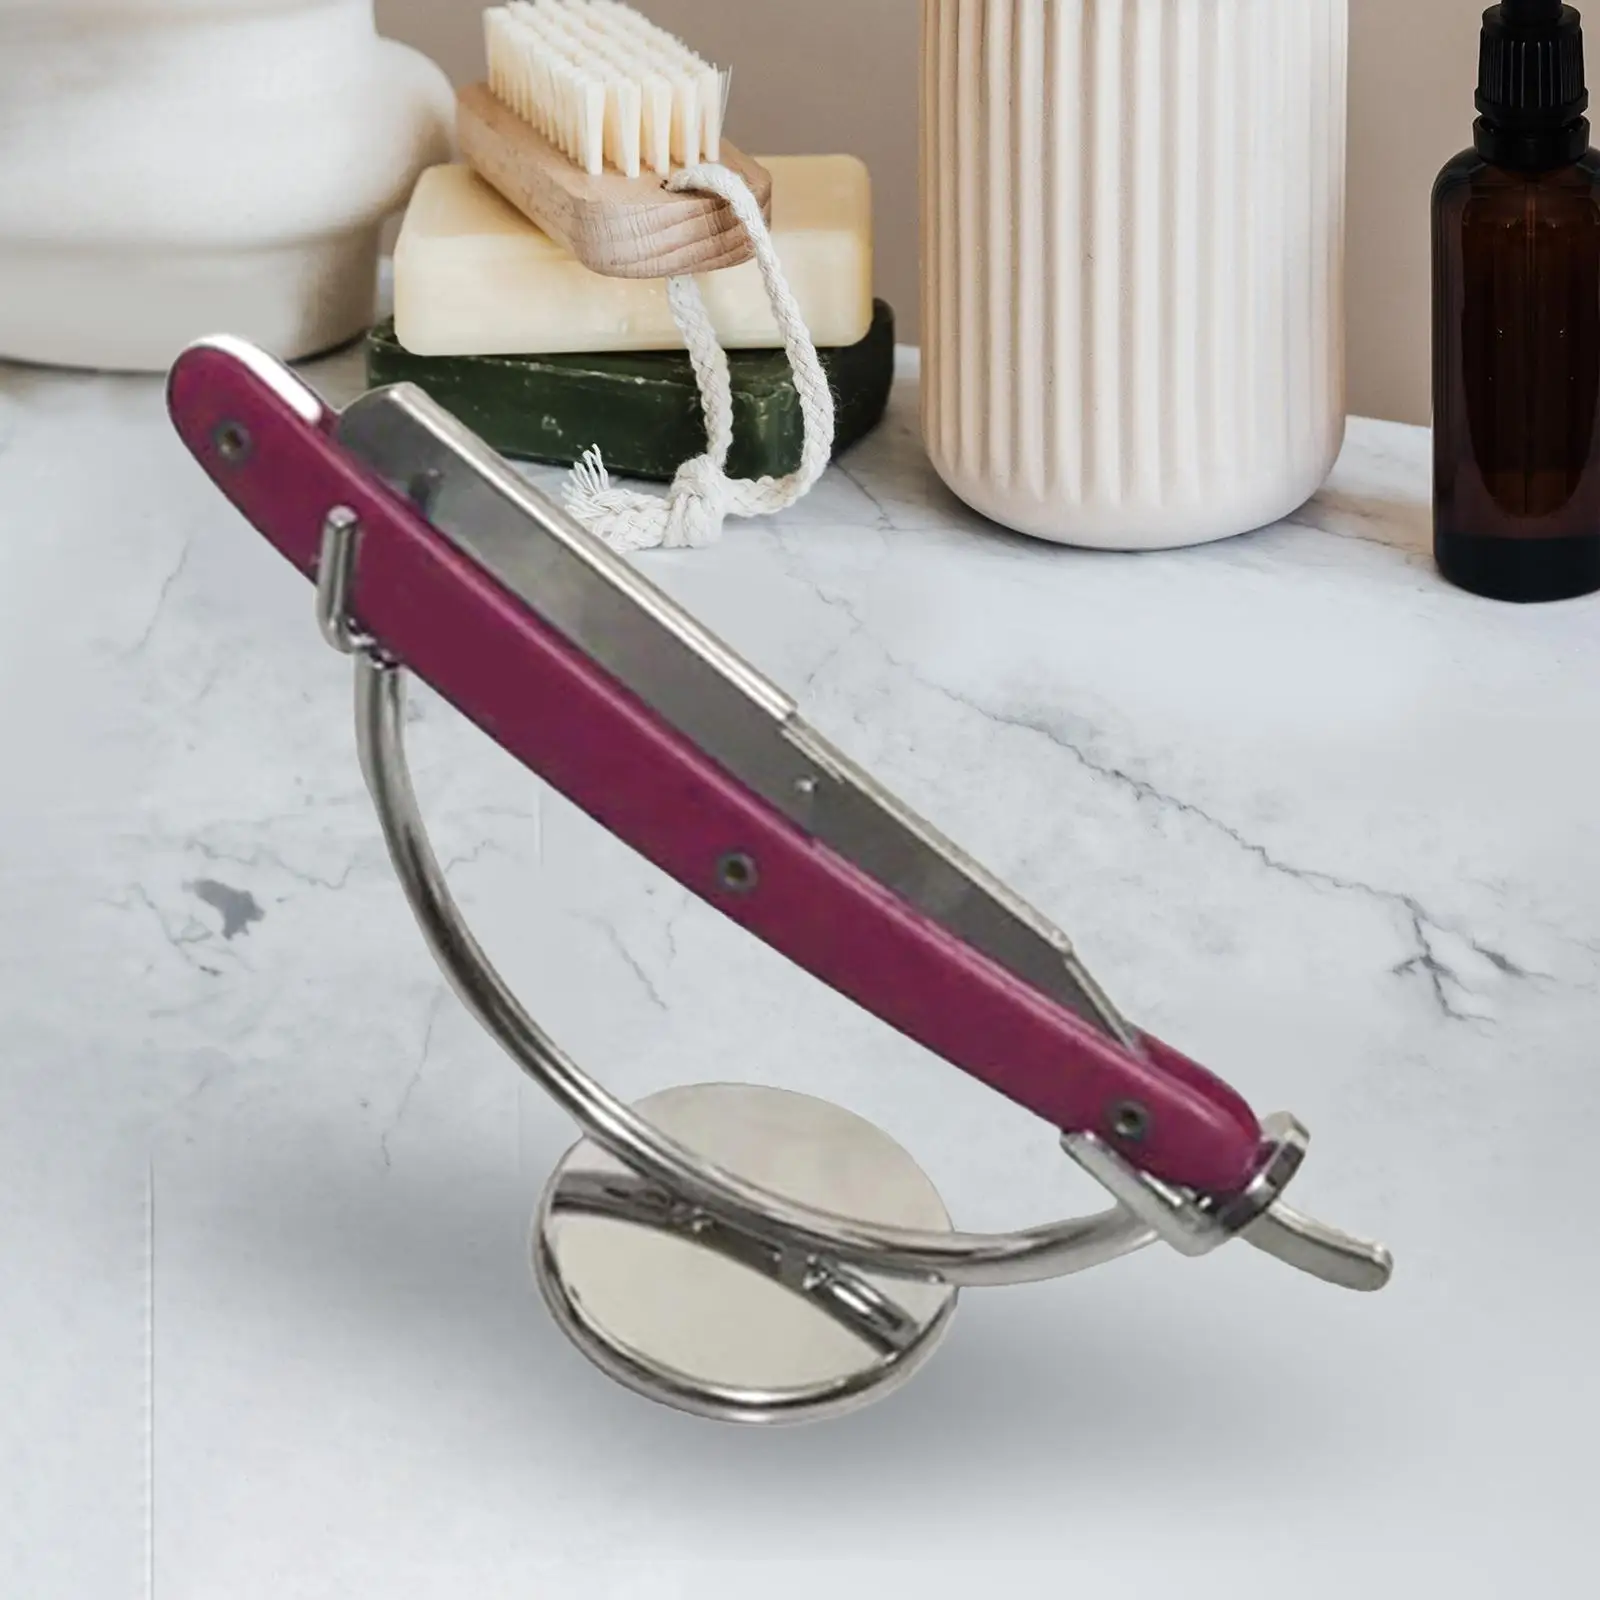 Straight Razor Stand Curved Stand Razor Holder Present for Men Bottom Diameter 5cm/2inch Polished Finishing Accessories Rack